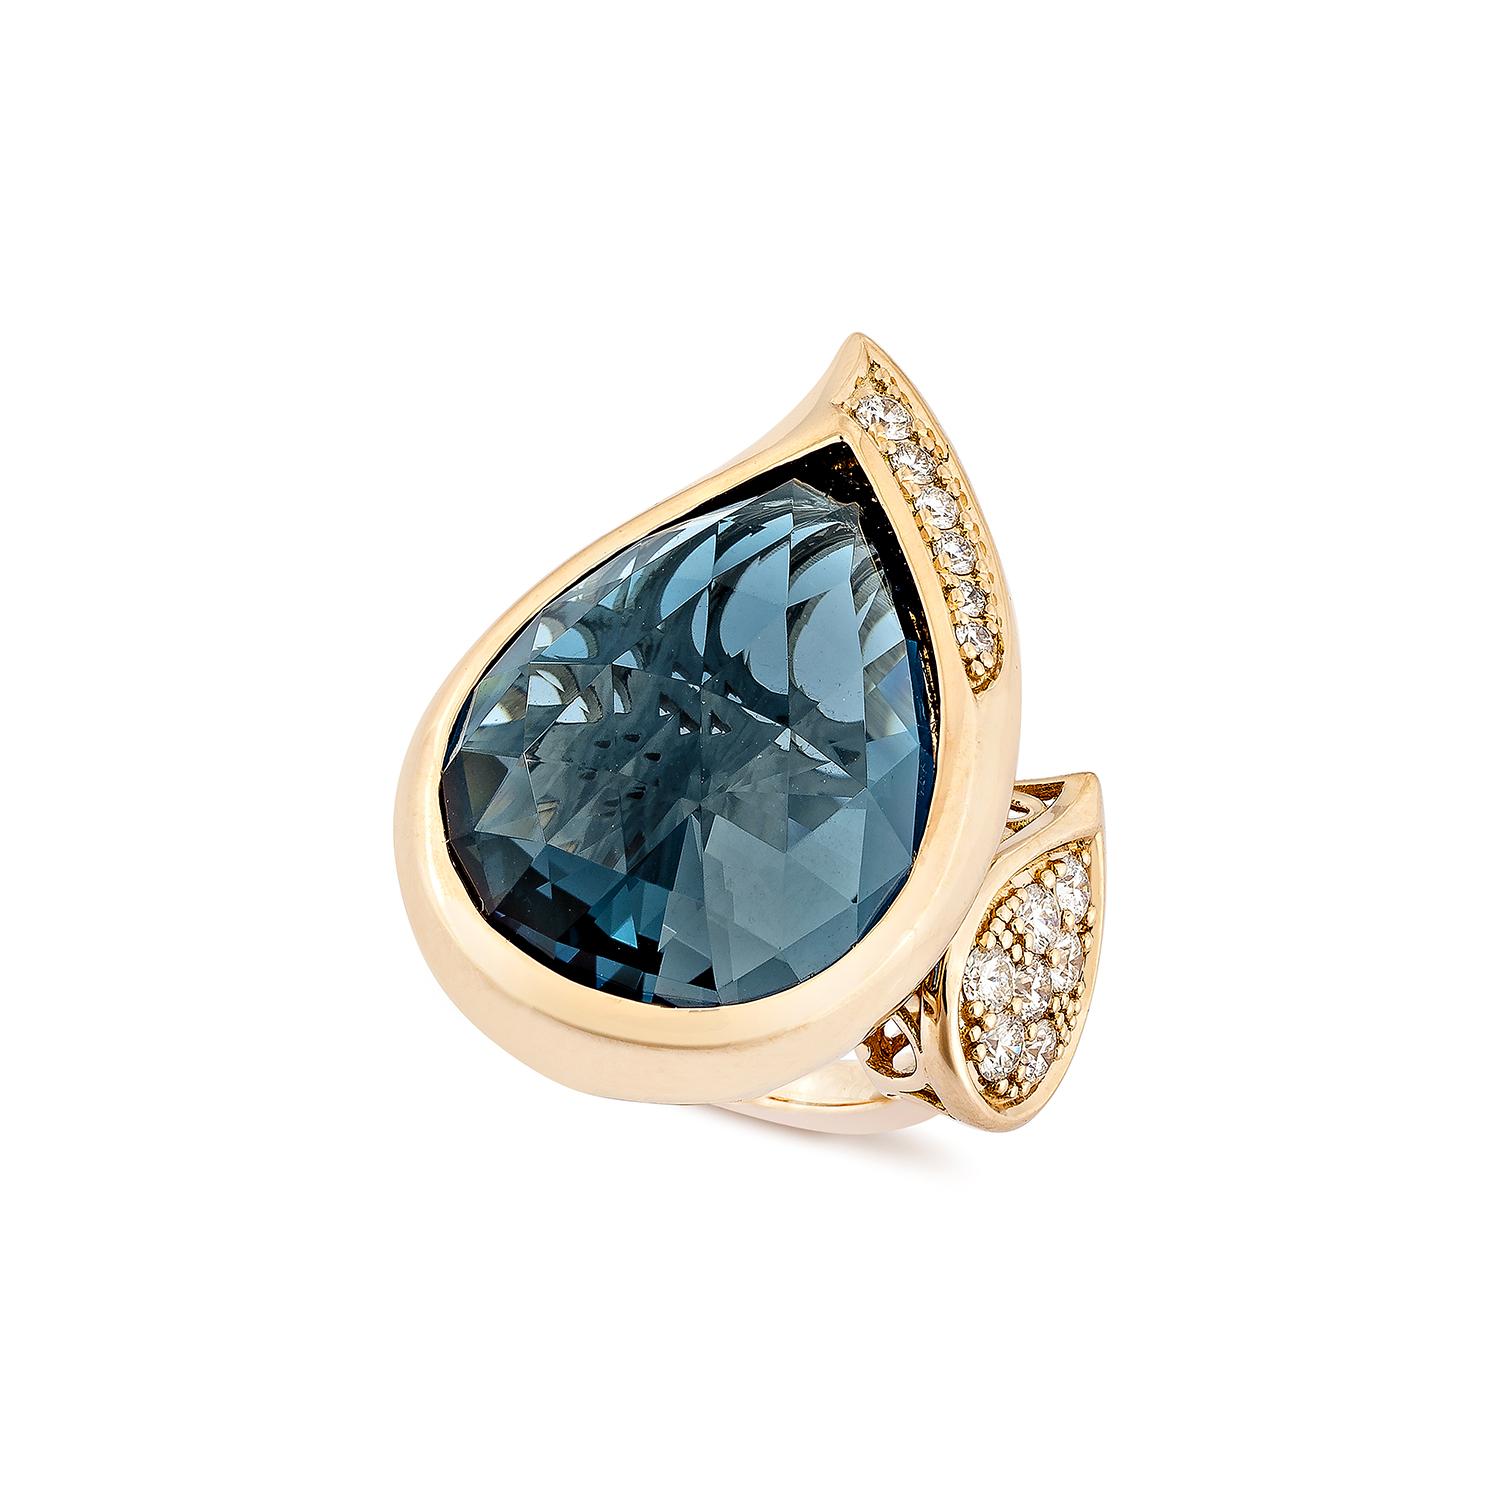 Contemporary 21.35 Carat London Blue Topaz Fancy Ring in 18Karat Rose Gold with Diamond. For Sale